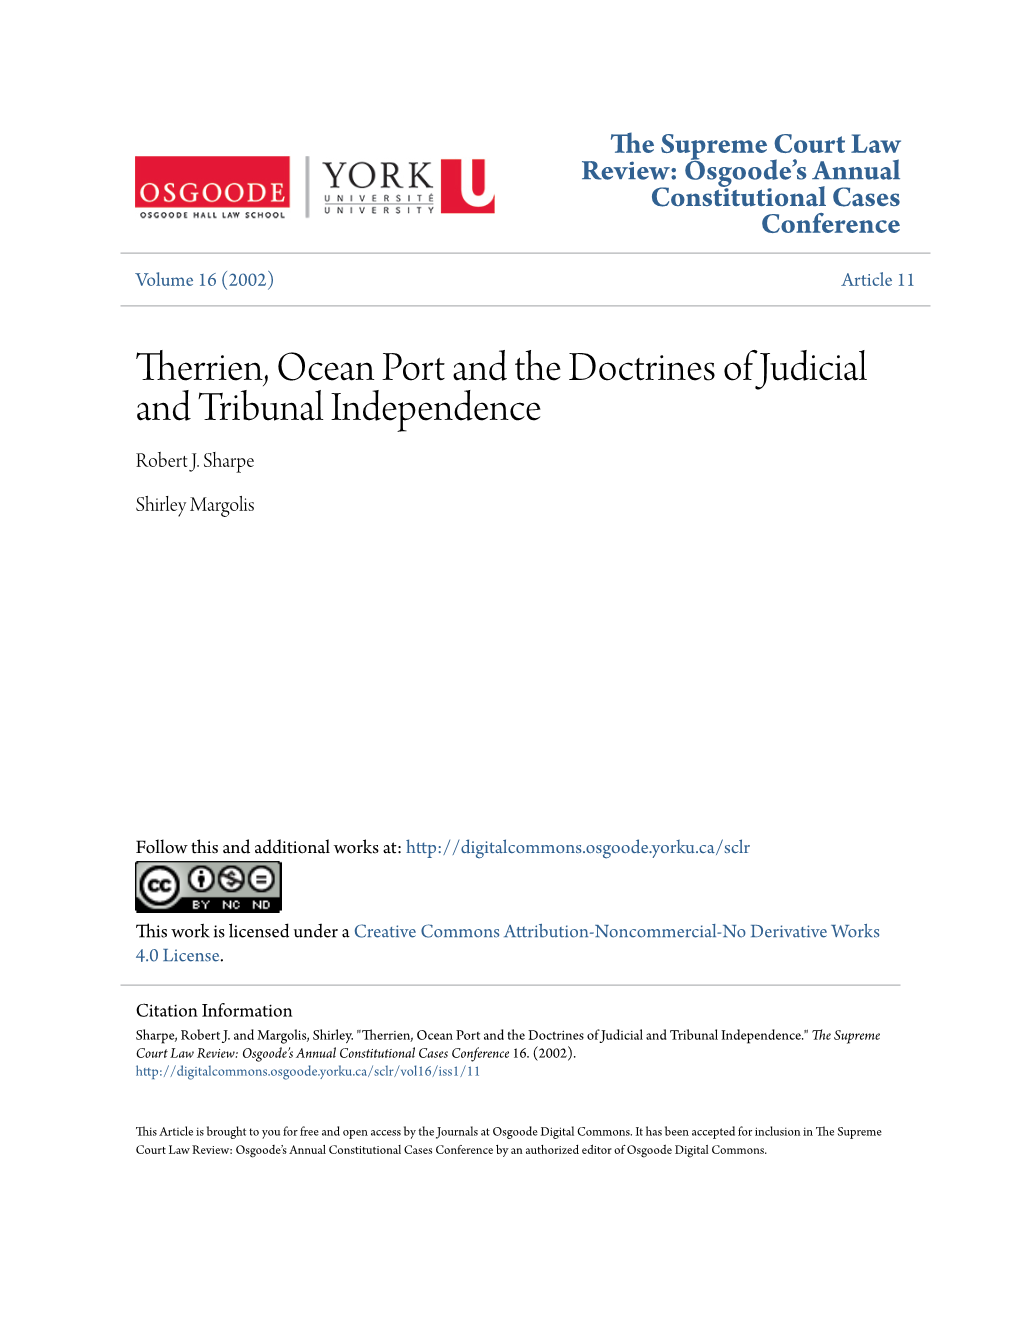 Therrien, Ocean Port and the Doctrines of Judicial and Tribunal Independence Robert J